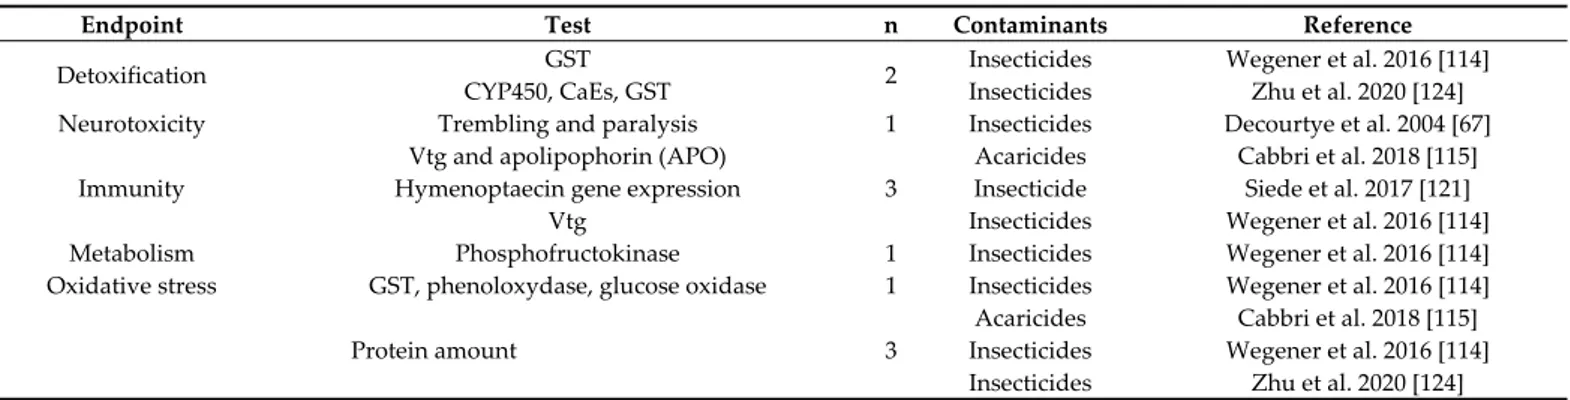 Table 4. Summary of semi-field studies divided by molecular and enzymatic endpoint and contaminants